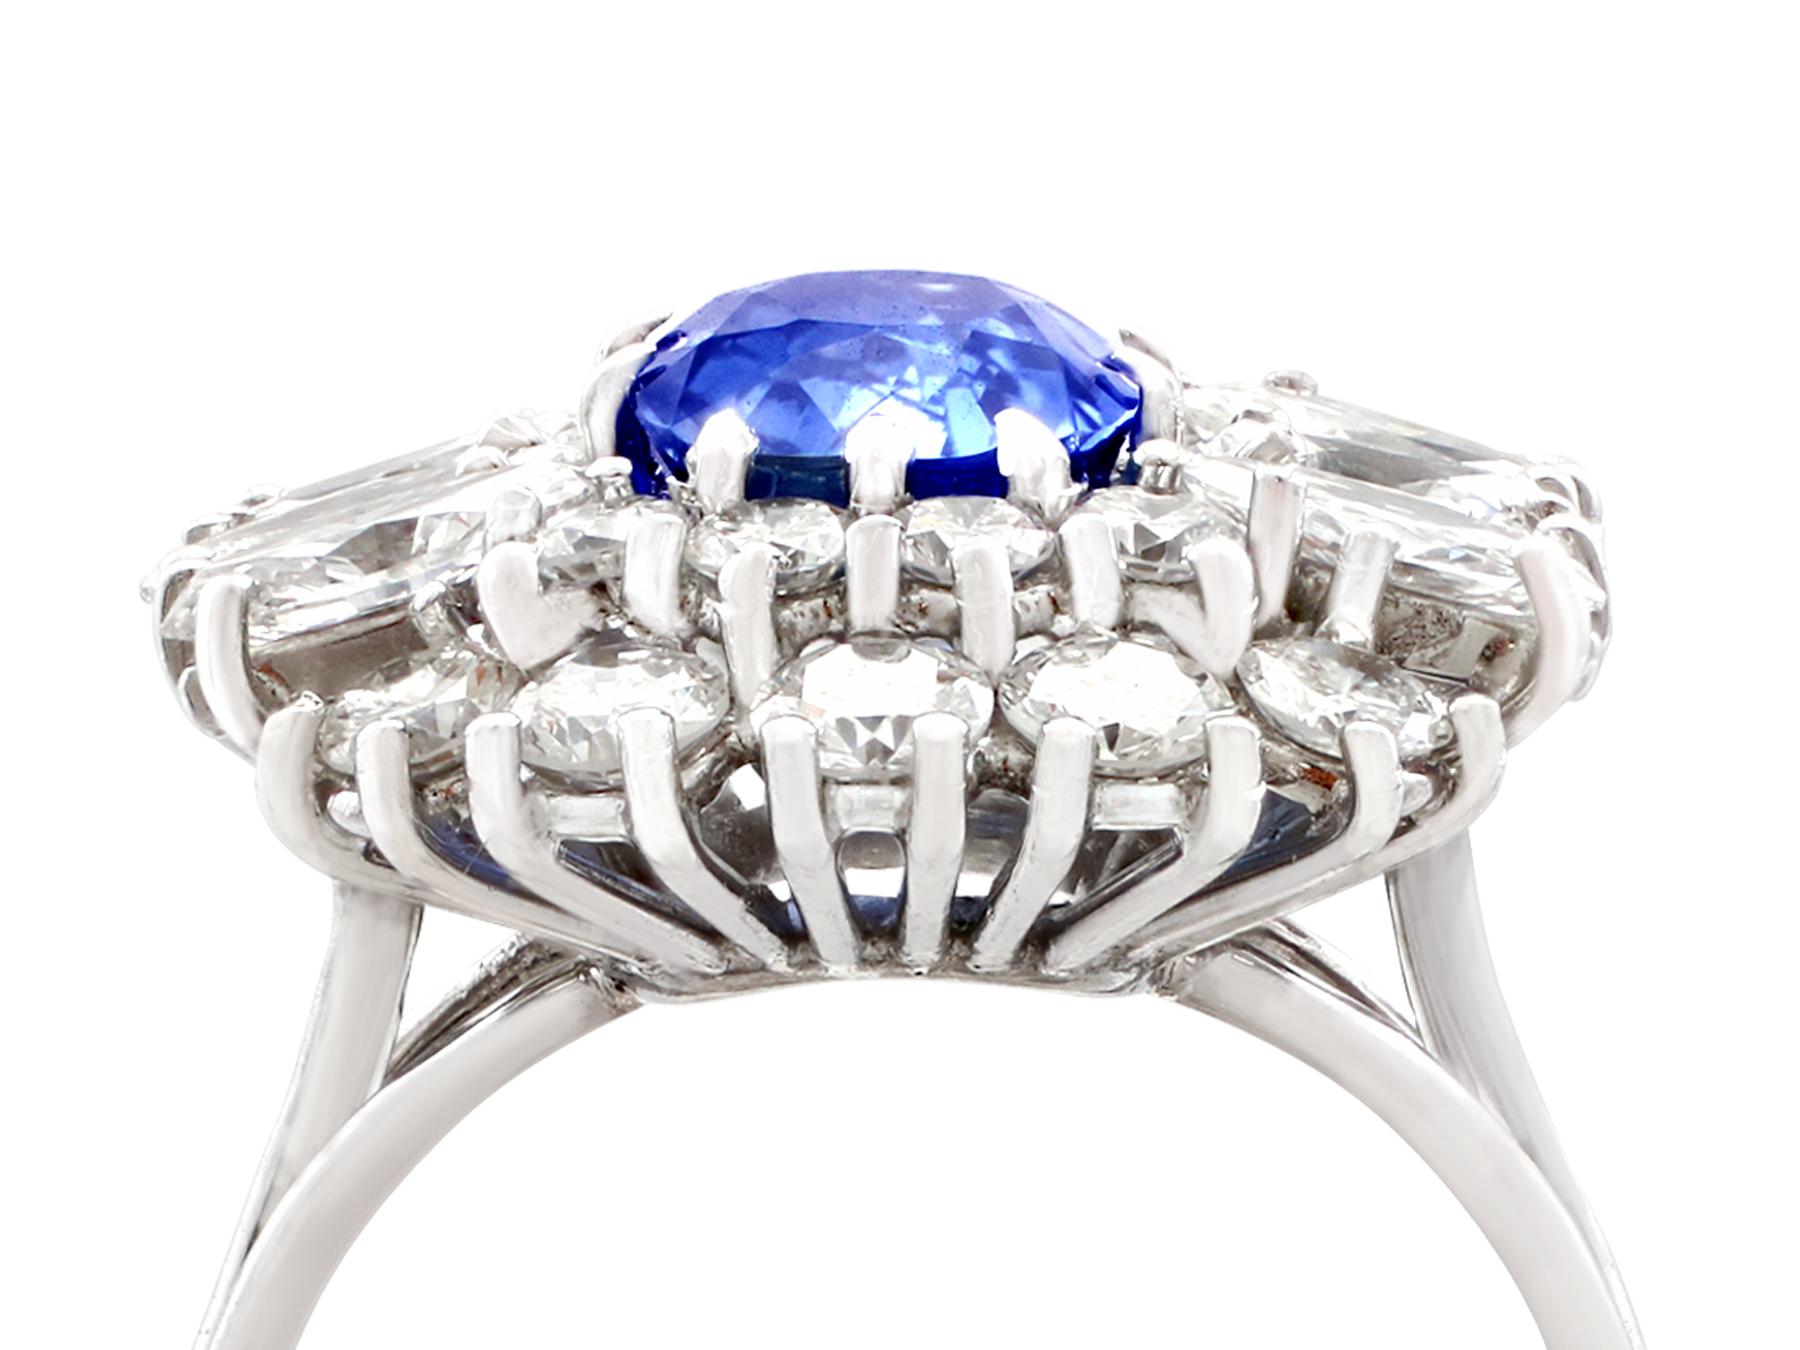 An impressive antique 2.70 Ct blue sapphire and 2.42 Ct diamond, 18k and 15k white gold dress ring; part of our diverse antique jewelry collections.

This stunning, fine and impressive 1930's sapphire and diamond ring has been crafted in 18k white